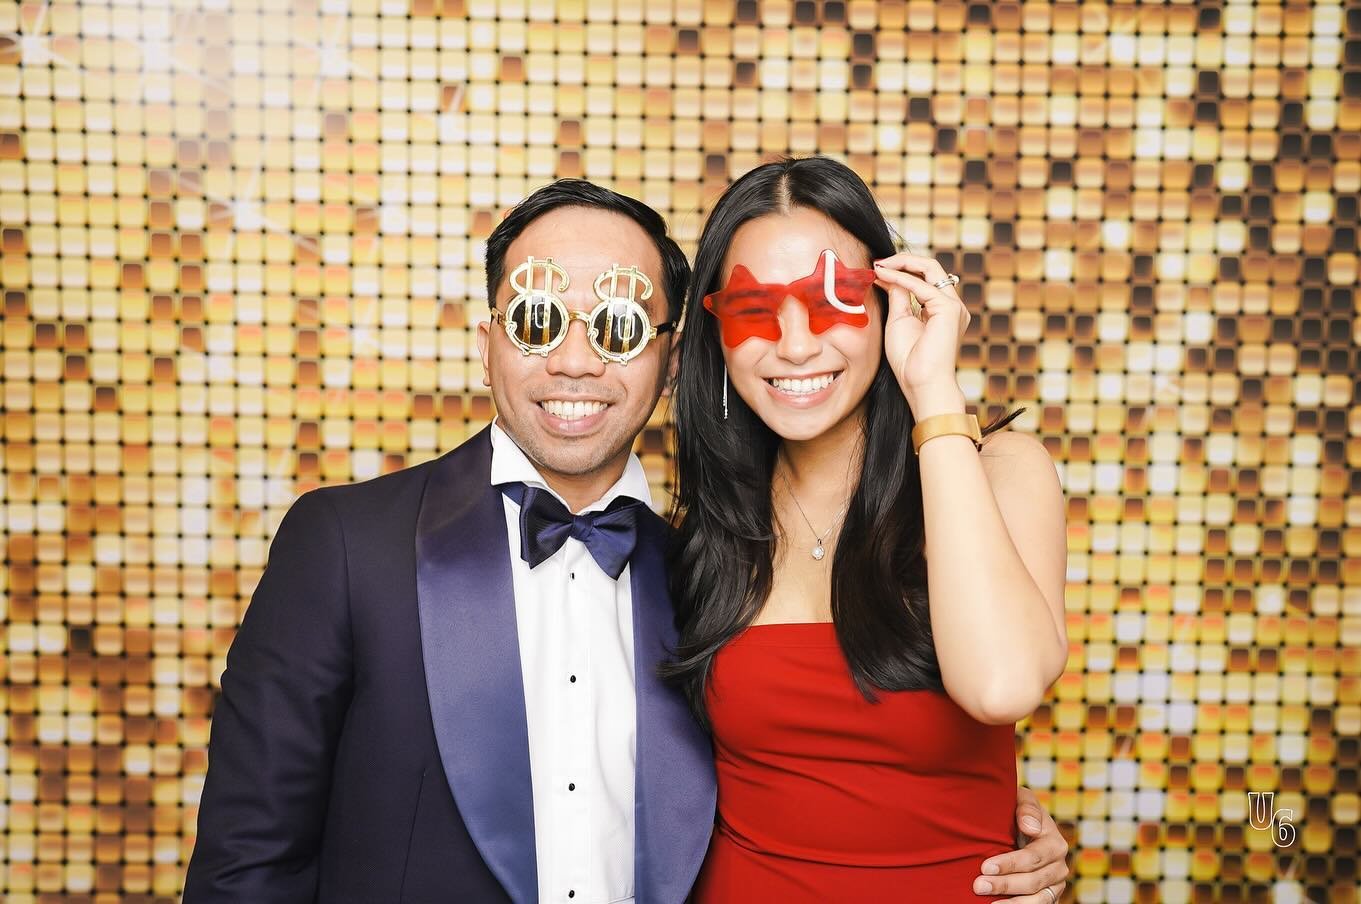 We&rsquo;re all for the candid moments! ✨

| Photo booth rental, Event photo booth, Party photo booth, Wedding photo booth, Corporate photo booth, Photo booth hire, Selfie booth, Props photo booth, Open-air photo booth, Vintage photo booth |